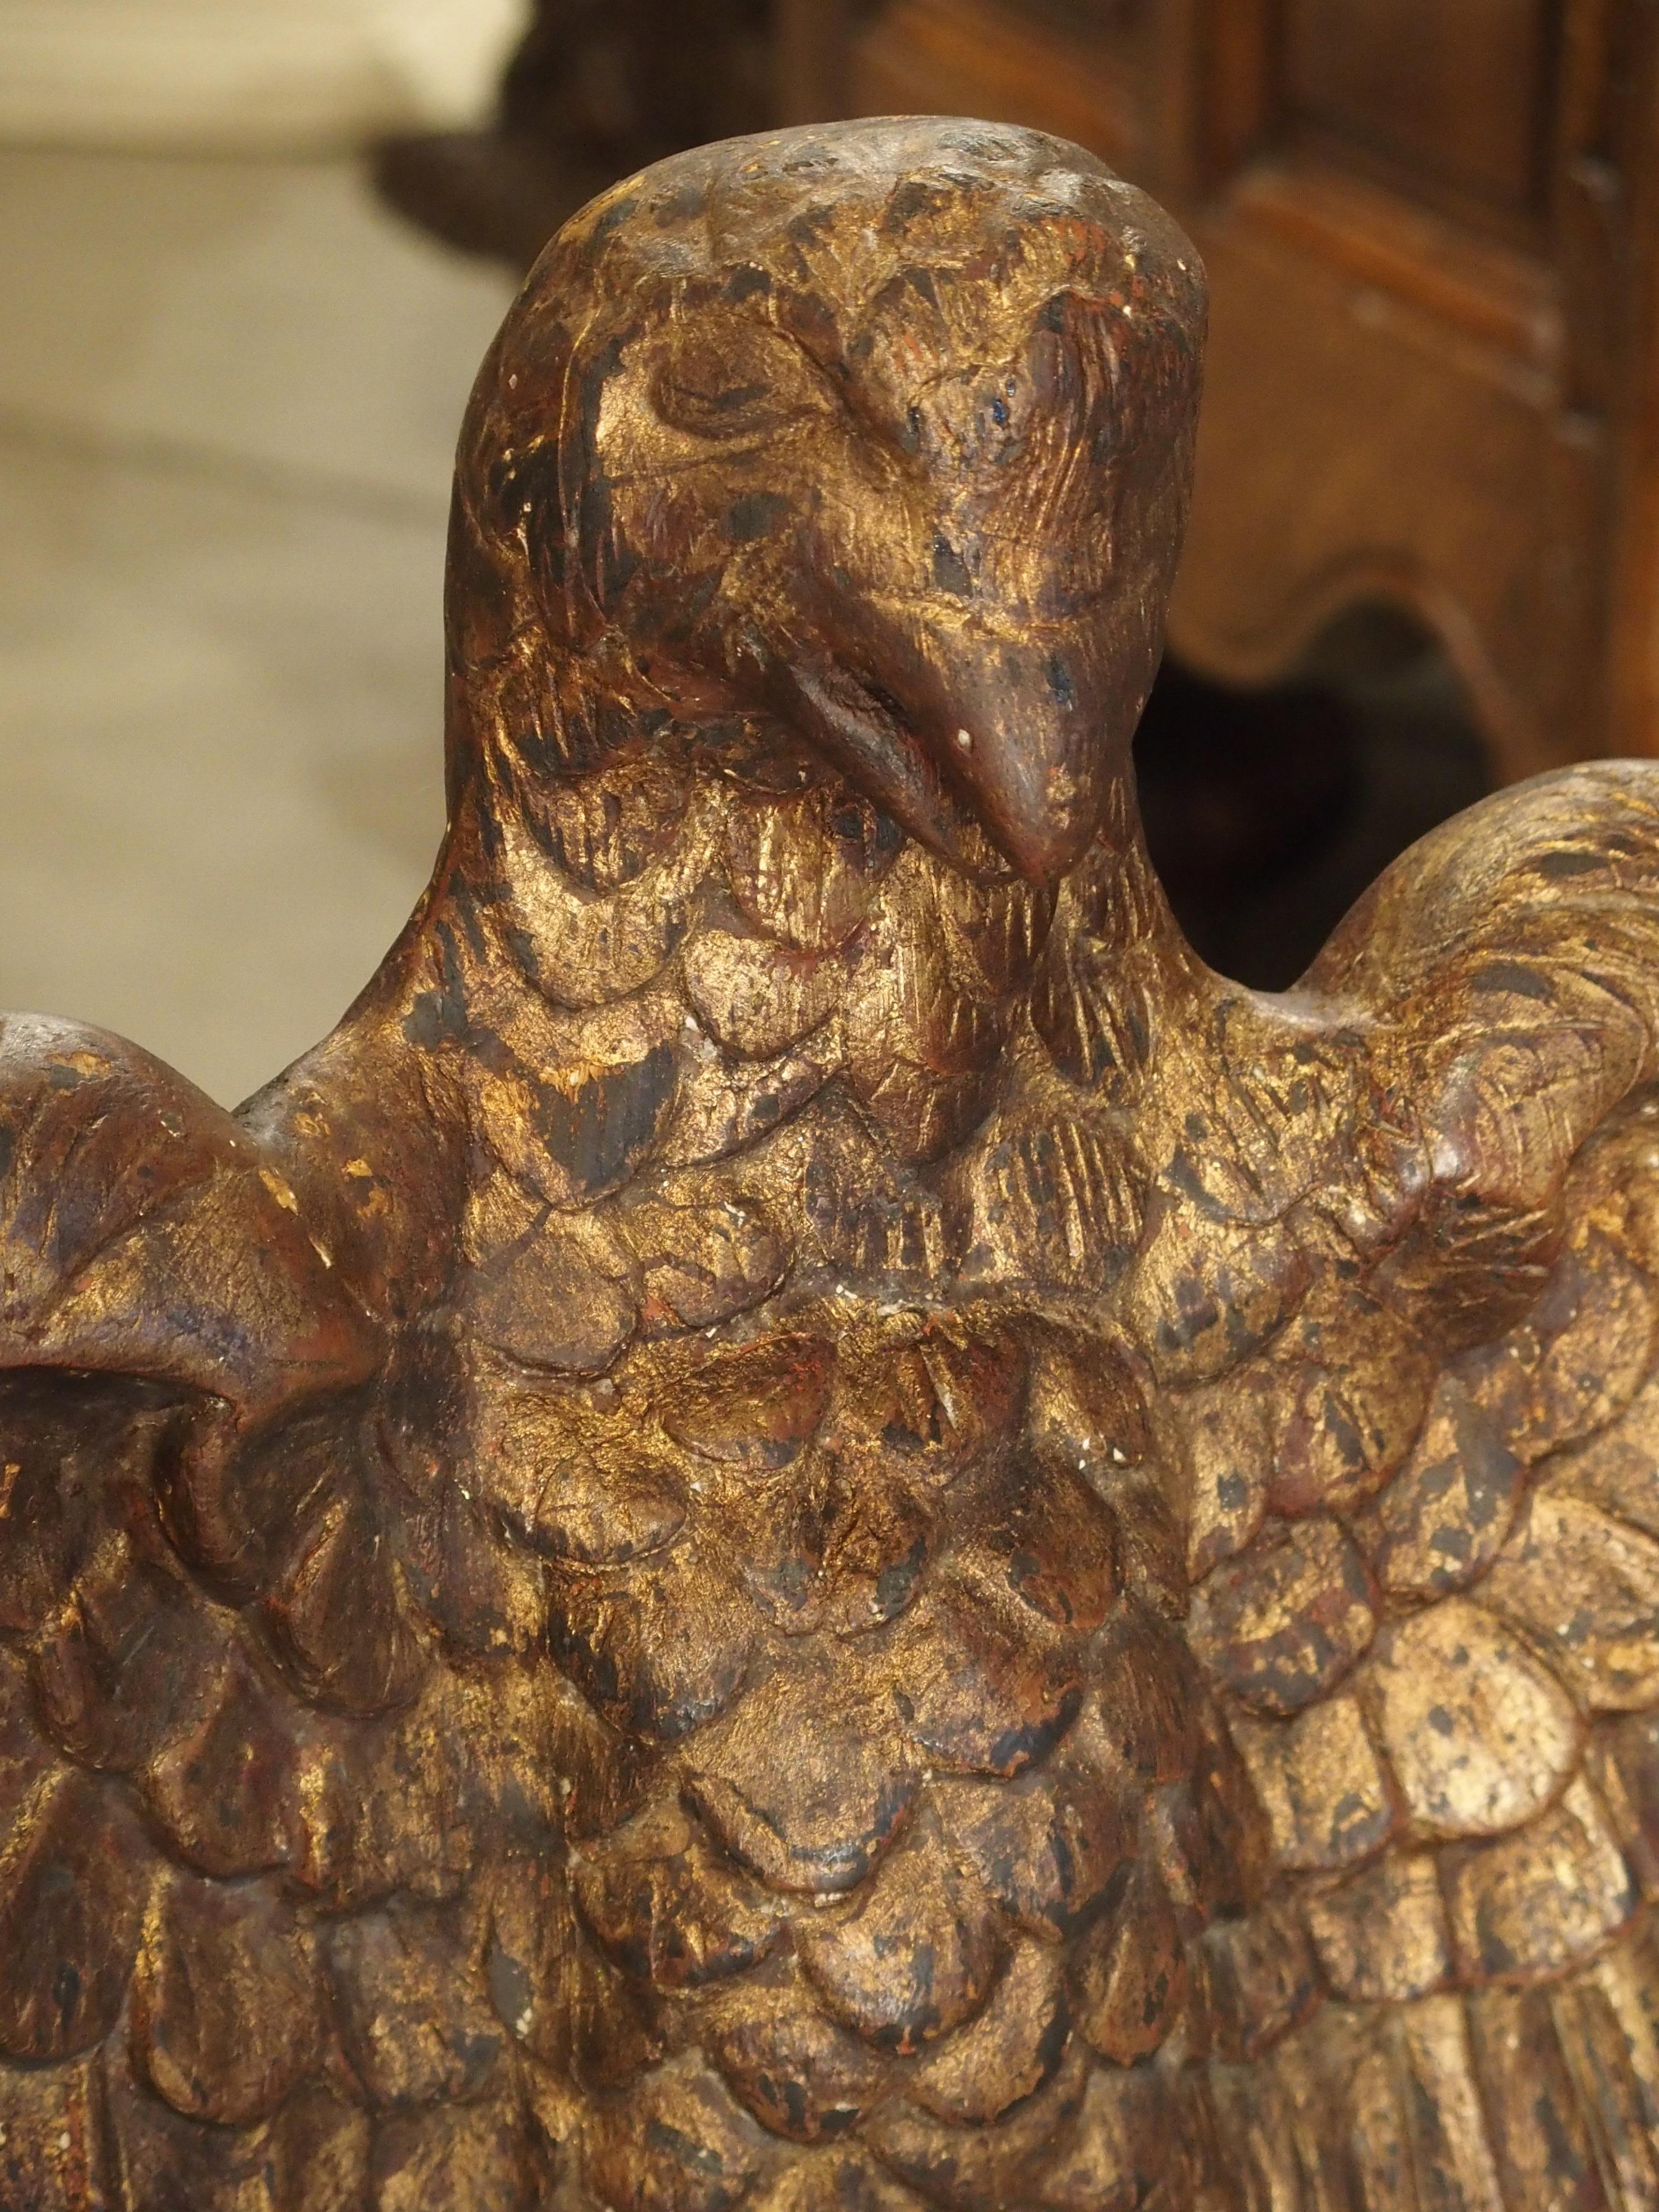 From Spain, this impressive hand-carved eagle dates to the 1700s. Most likely it was part of an architectural, more specifically a larger heraldic crest or carving. Eagles represent strength and immortality and have been depicted in art and